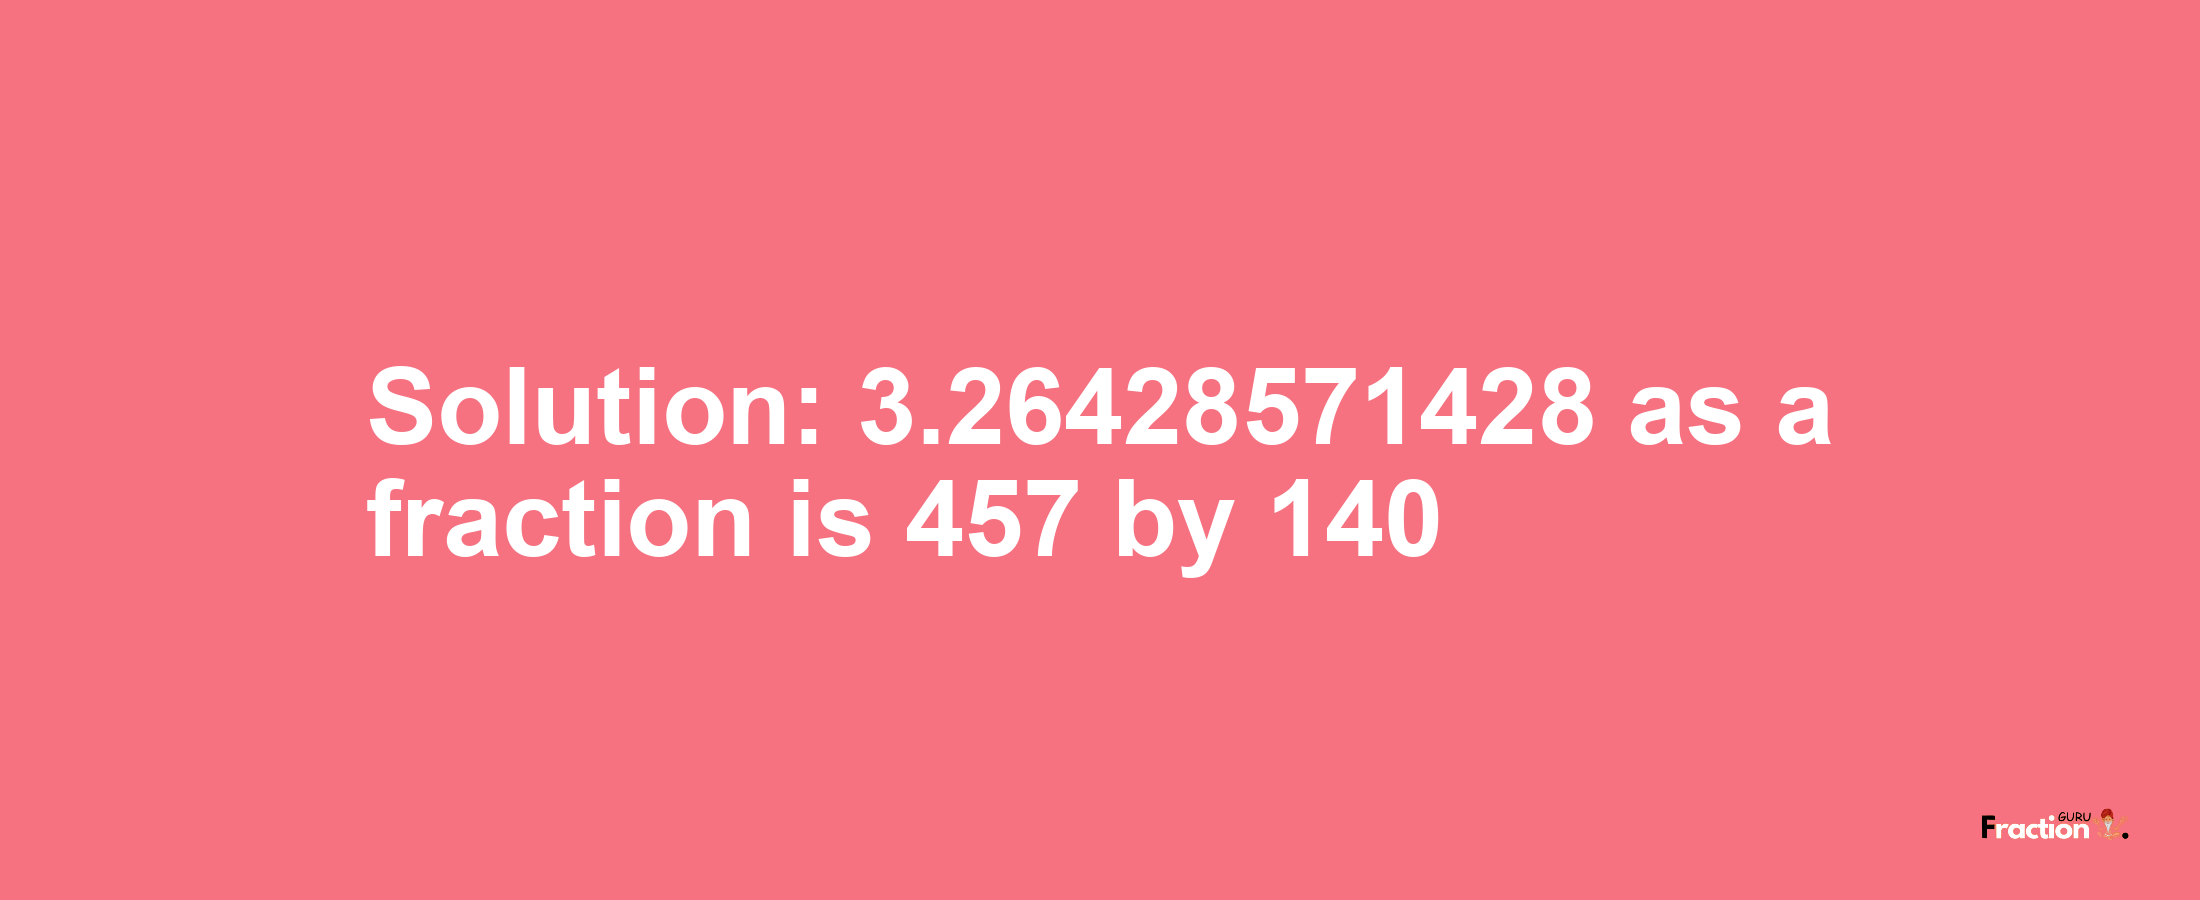 Solution:3.26428571428 as a fraction is 457/140